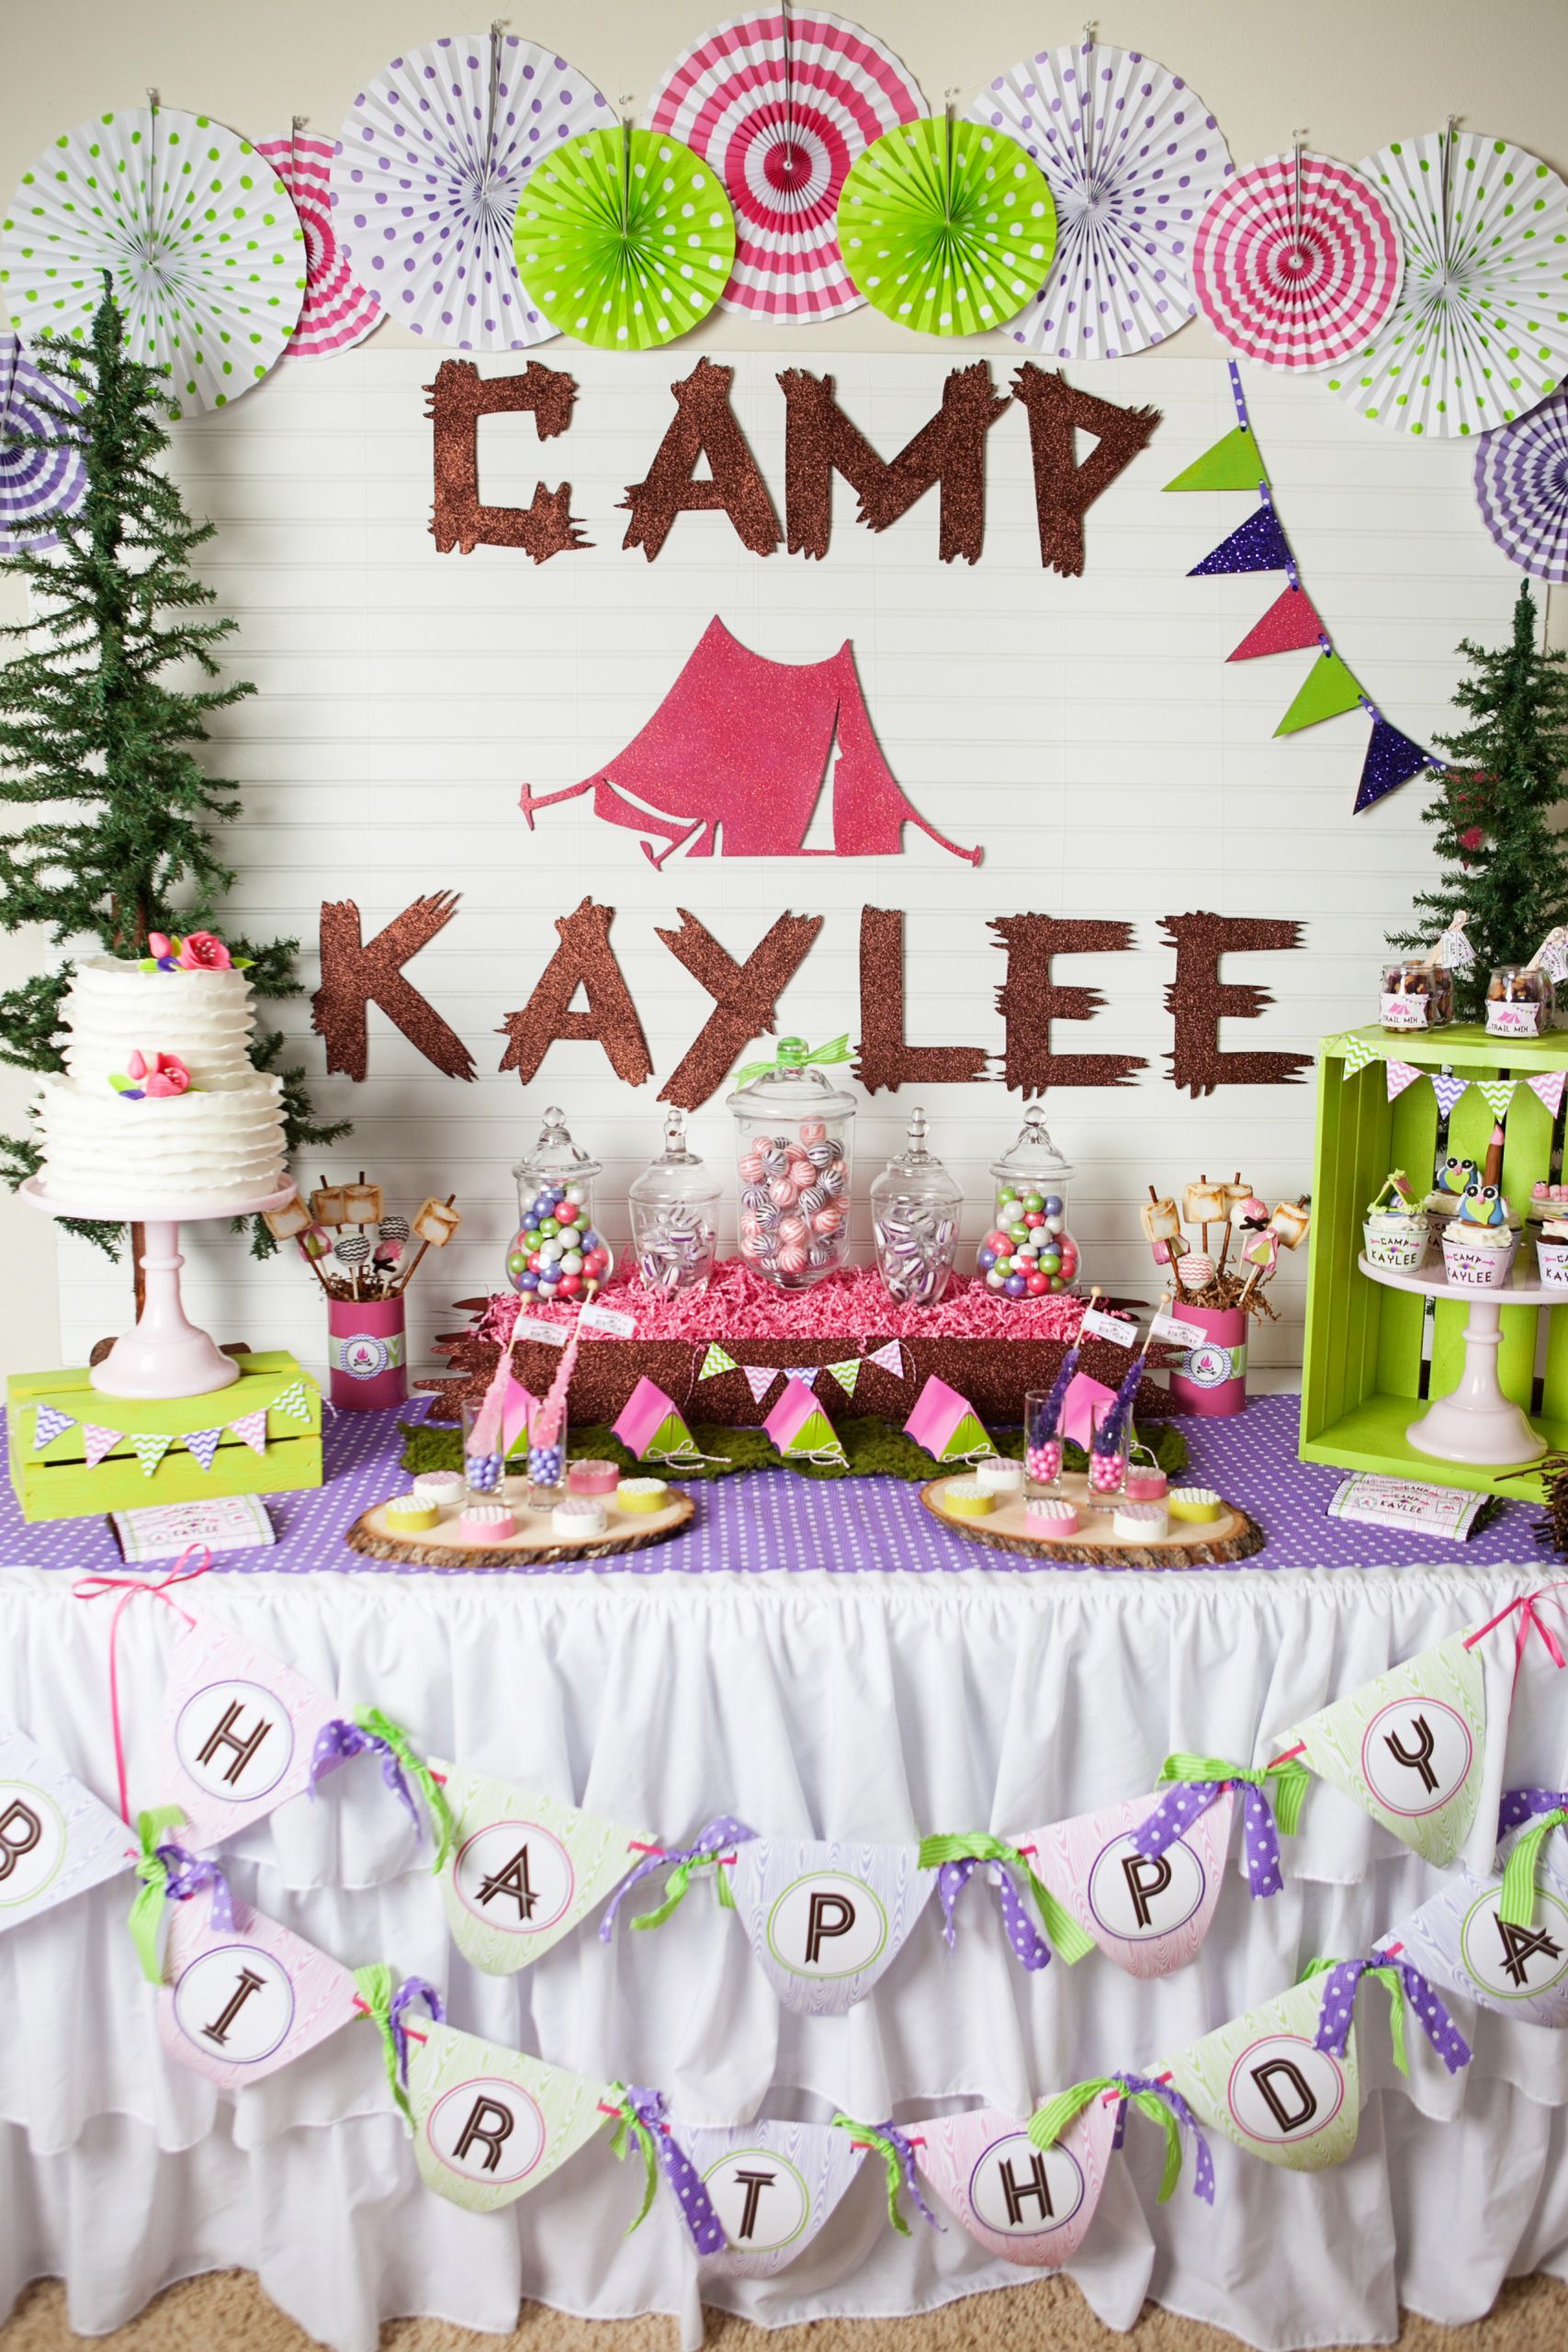 Camping Birthday Party Supplies
 The Carver Crew Glam Camping Birthday Party Glamping